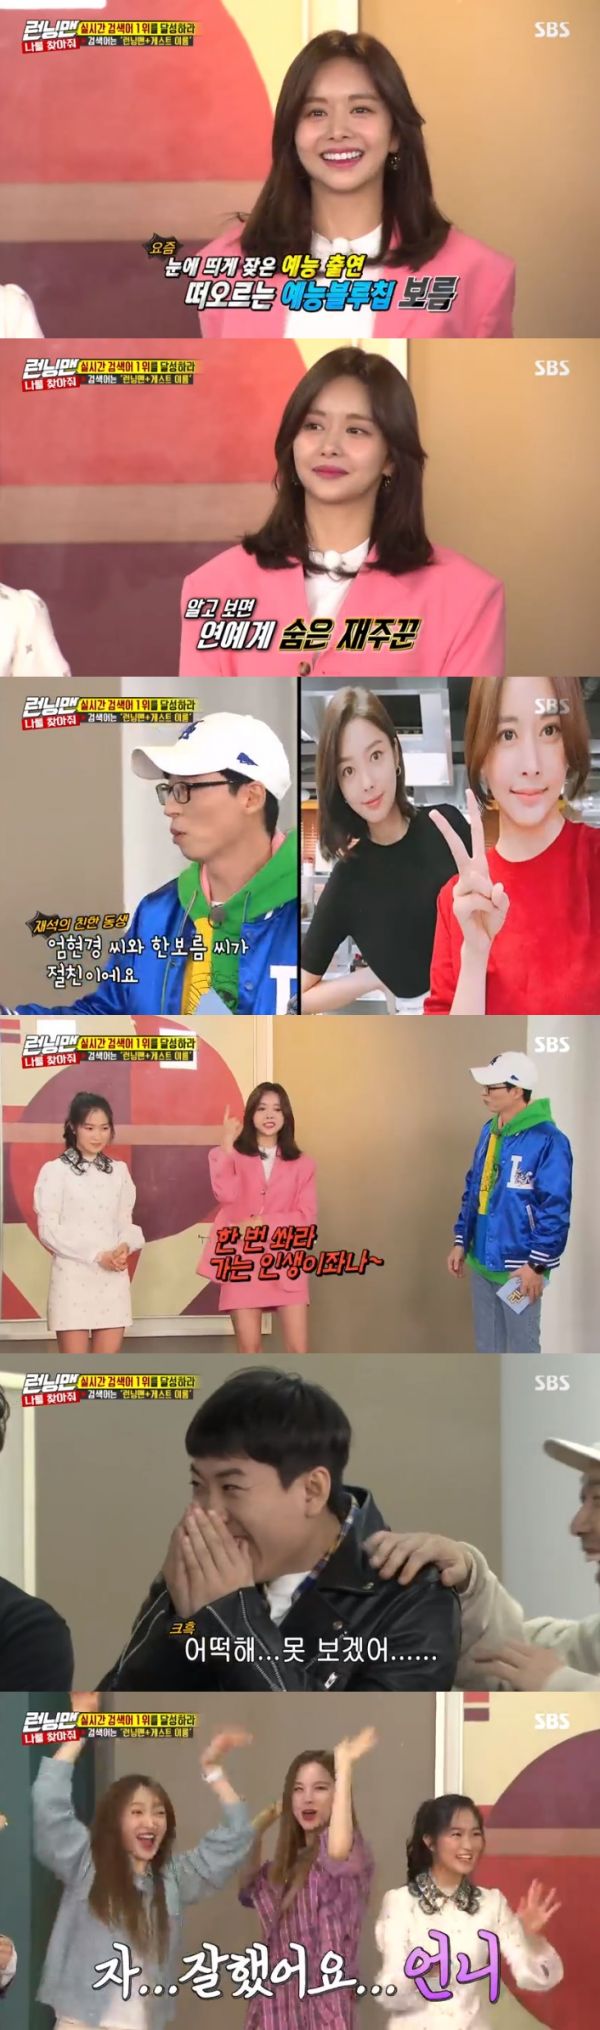 Han Bo-reum turned Running Man over with shock rap skillsOn the 21st, SBS entertainment program Running Man appeared as a guest by group EXID Solzhi Hani, Sevintin Min Kyu Seung, actor Kim Hye Yoon and Han Bo-reum.On the day of the appearance of Han Bo-reum, Yoo Jae-Suk said, Mr. Borm has come out sometimes in entertainment, and he is especially close to the end of the members.Mr. Borm is also close to his close brother, Mr. Hyon-kyong Um, a dance teacher of Mr. Hyon-kyoung Um. Yoo Jae-Suk also recited Han Bo-reums specialties, including rap, bowling, yoga, and scuba diving.Yoo Jae-Suk then asked Han Bo-reum to rap; Han Bo-reum also briefly showed a hard rap to be shy.Yoo Jae-Suk asked, Have you learned rap? And Han Bo-reum laughed when he replied, Savoe is old.